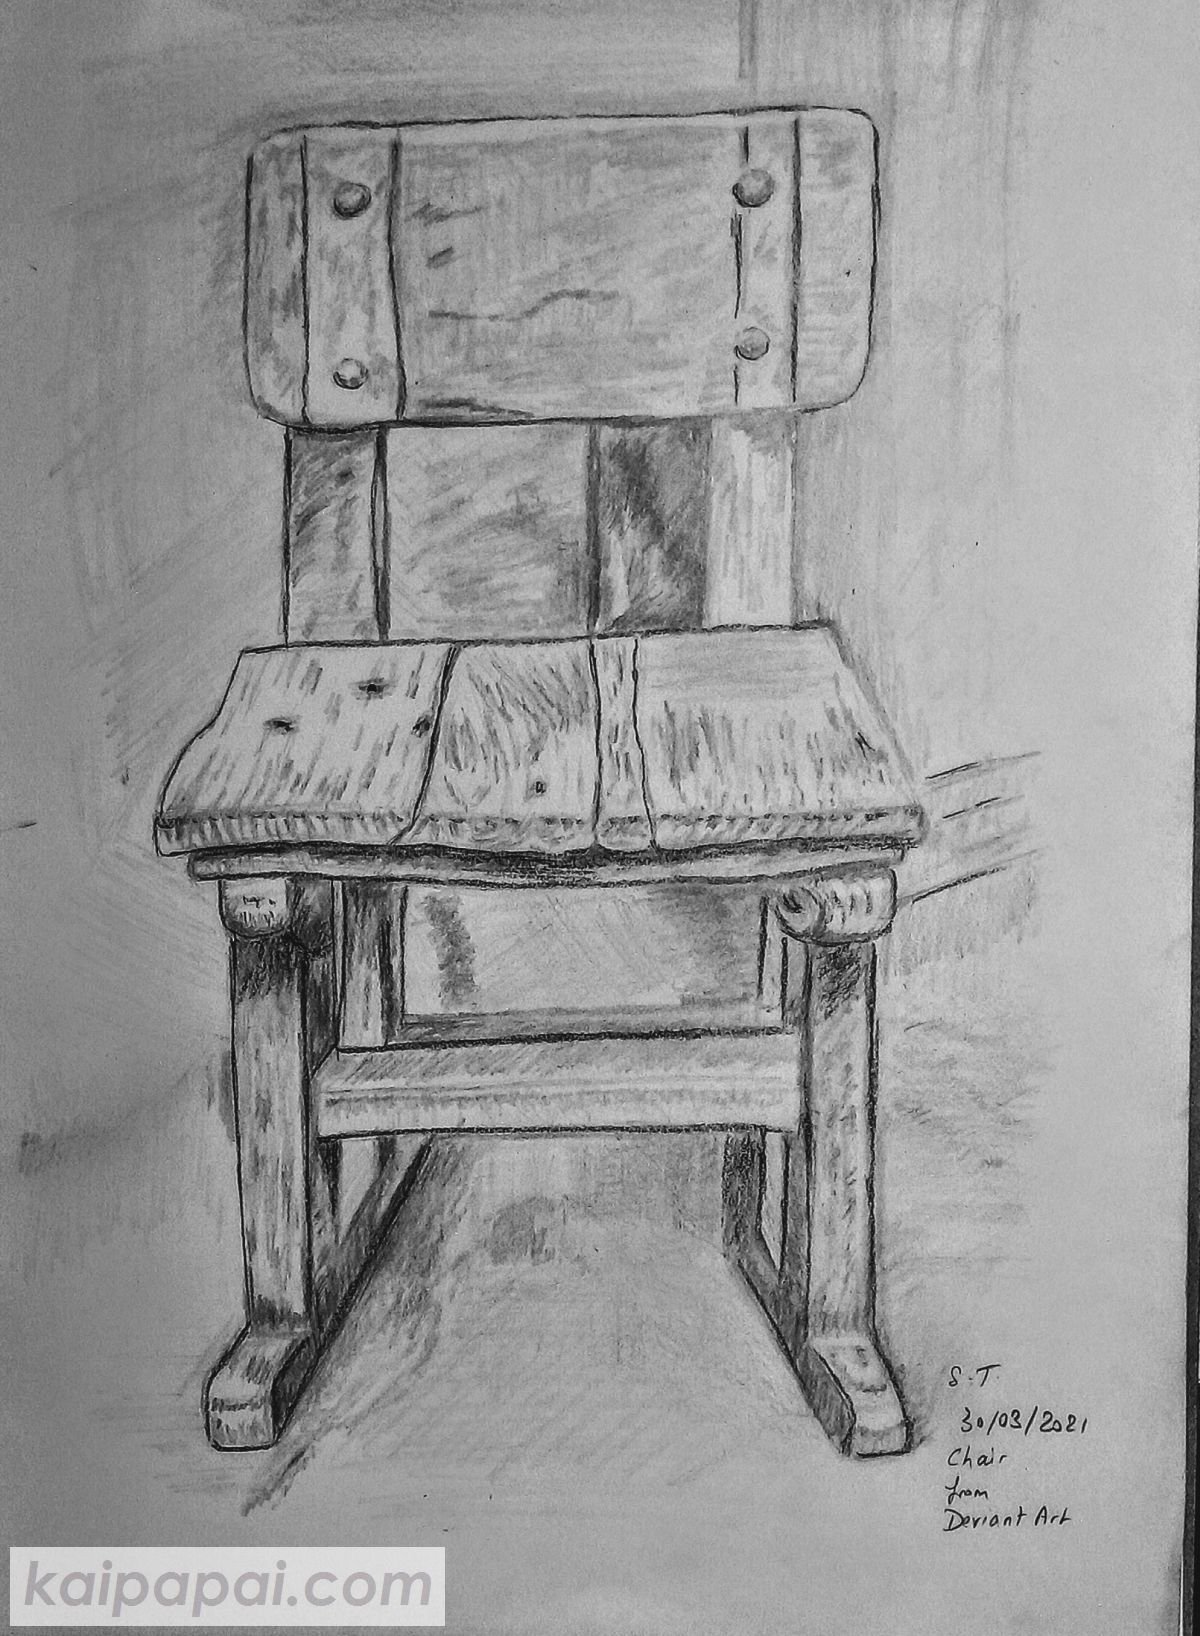 184-20210330_Chair (from Deviant Art)